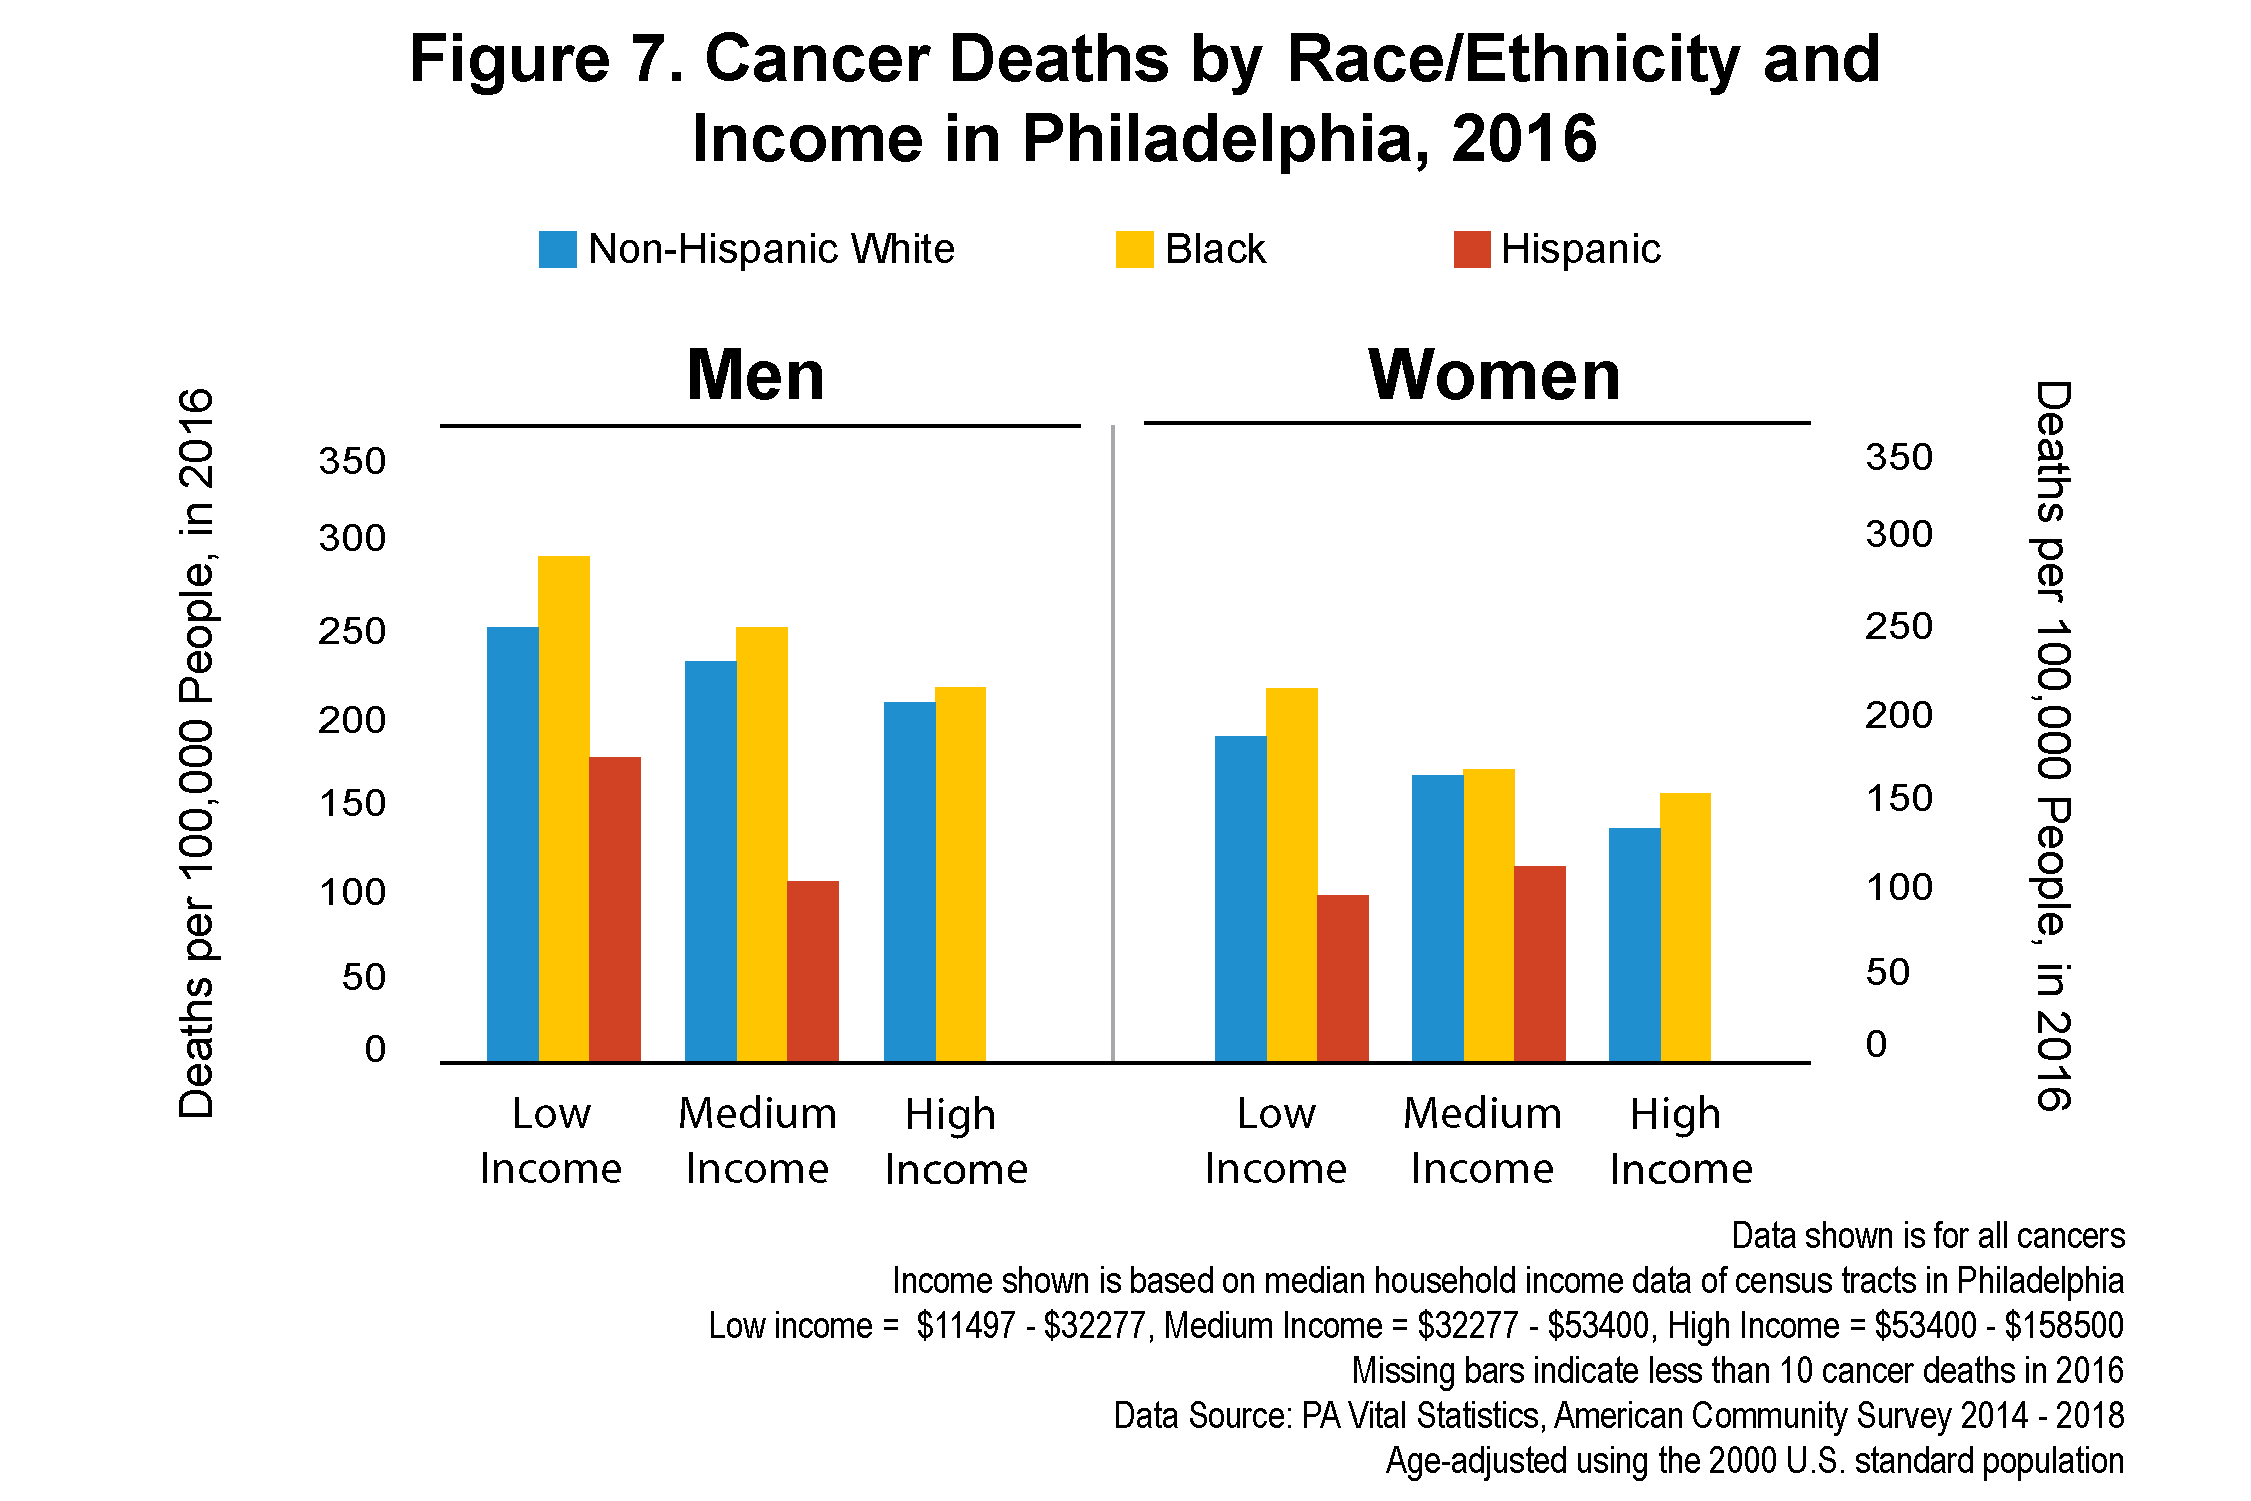 Figure 7. Cancer Deaths by Race/Ethnicity and Income in Philadelphia, 2016